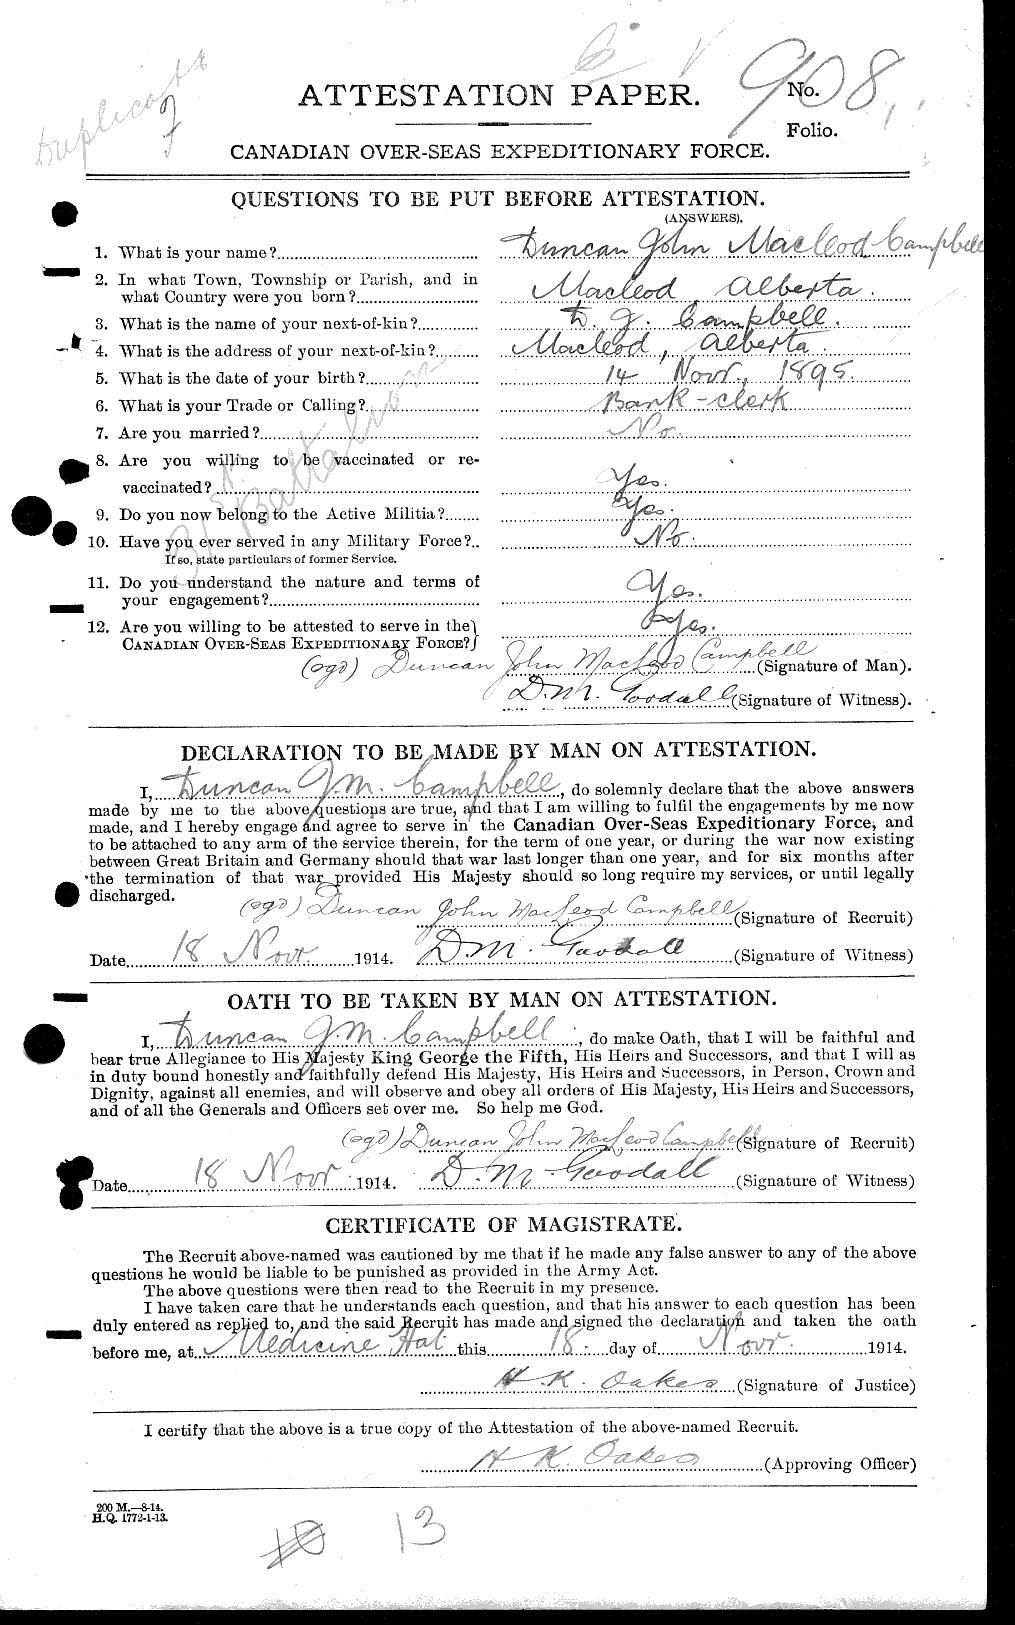 Personnel Records of the First World War - CEF 008222a